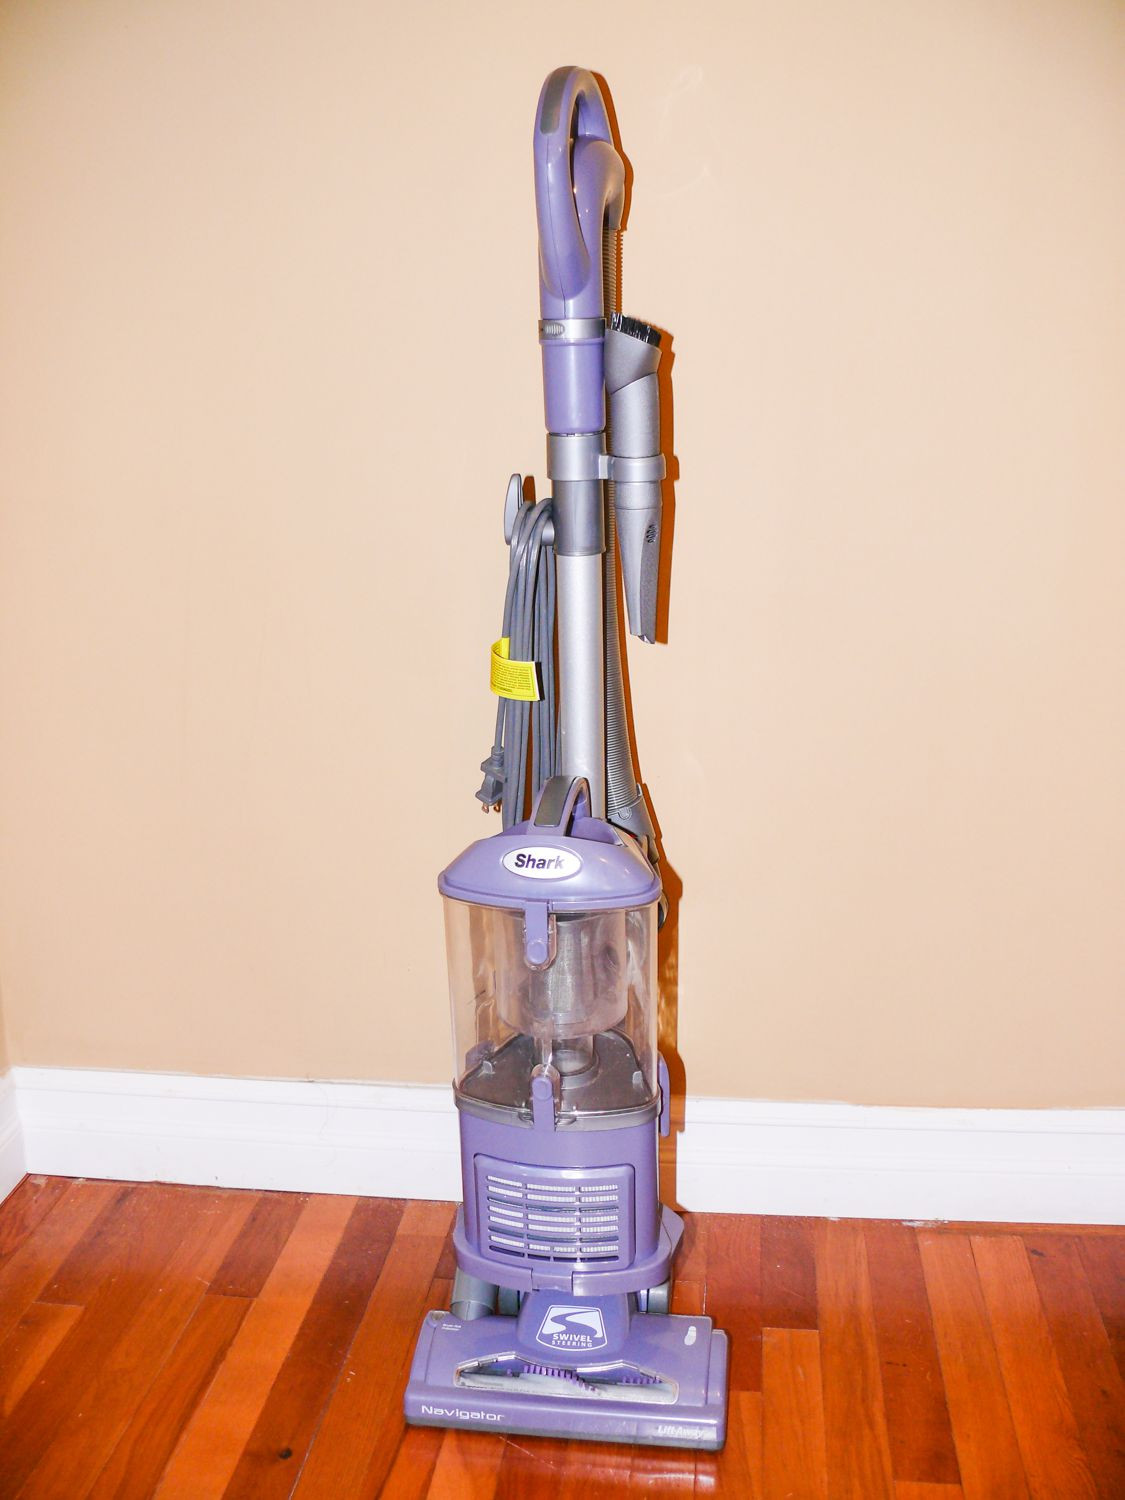 11 Lovable Lightweight Hardwood Floor Vacuum Reviews 2024 free download lightweight hardwood floor vacuum reviews of the 10 best vacuum cleaners to buy in 2018 intended for 4062974 2 4 5bbf71b6c9e77c00511018e2